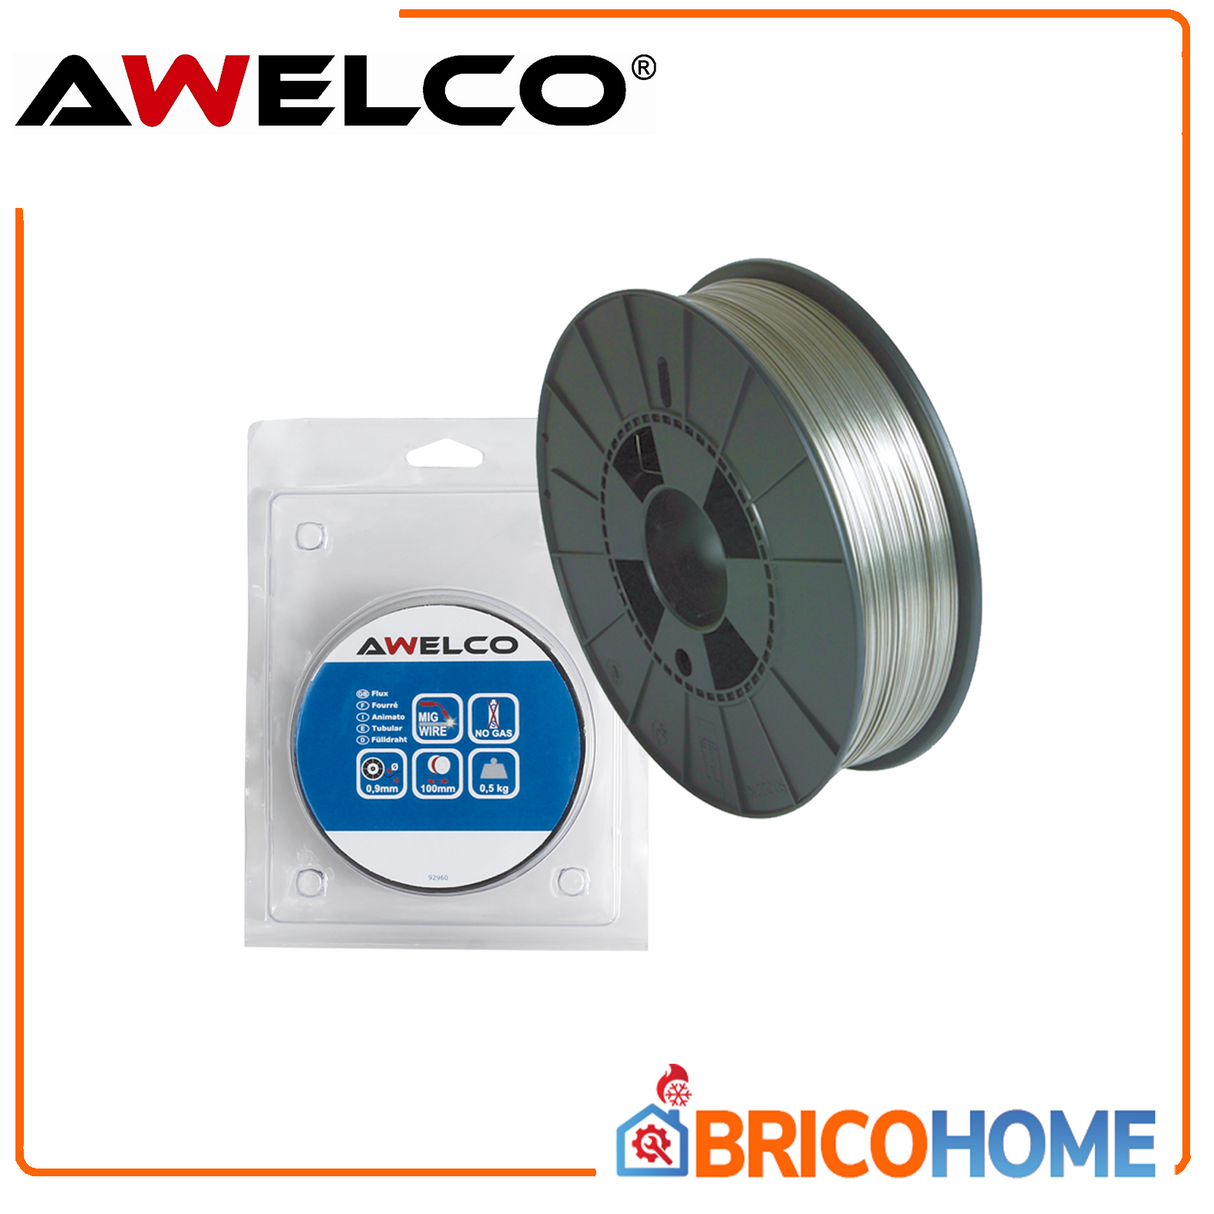 CORED WIRE COIL FOR NO GAS WELDING MACHINE Ø 0,9 MM. FROM 0,2 KG AWELCO